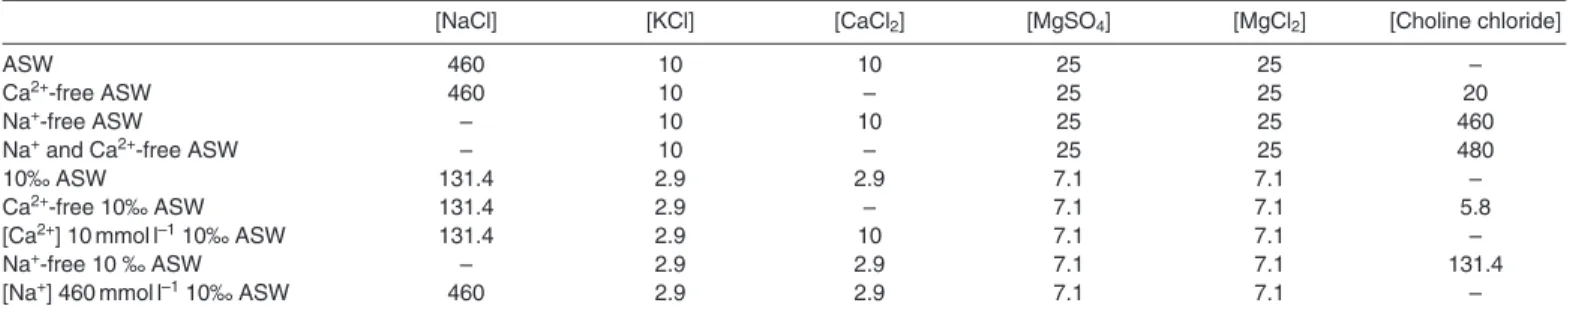 Table 1. Composition of artificial seawaters (ASW) used in the current study